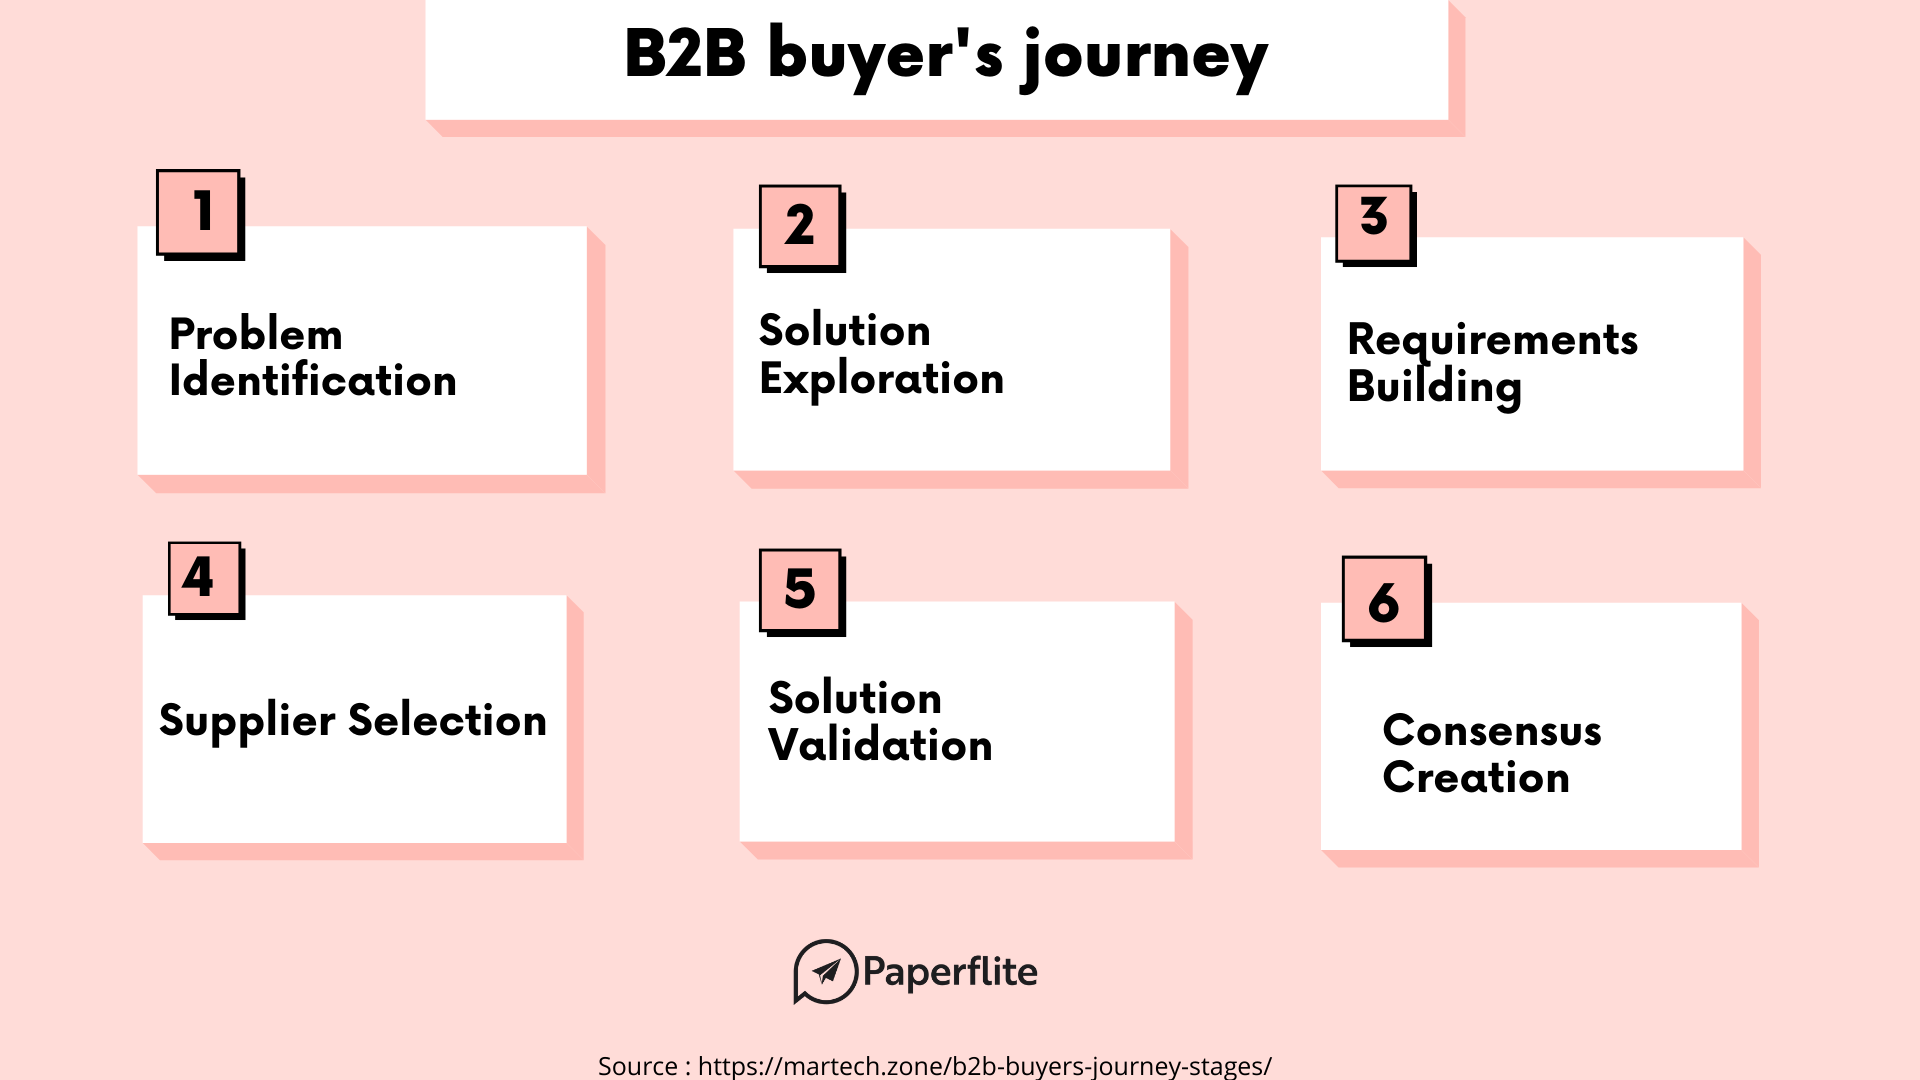 An image describing the buying activities of a B2B buyer - by Paperflite